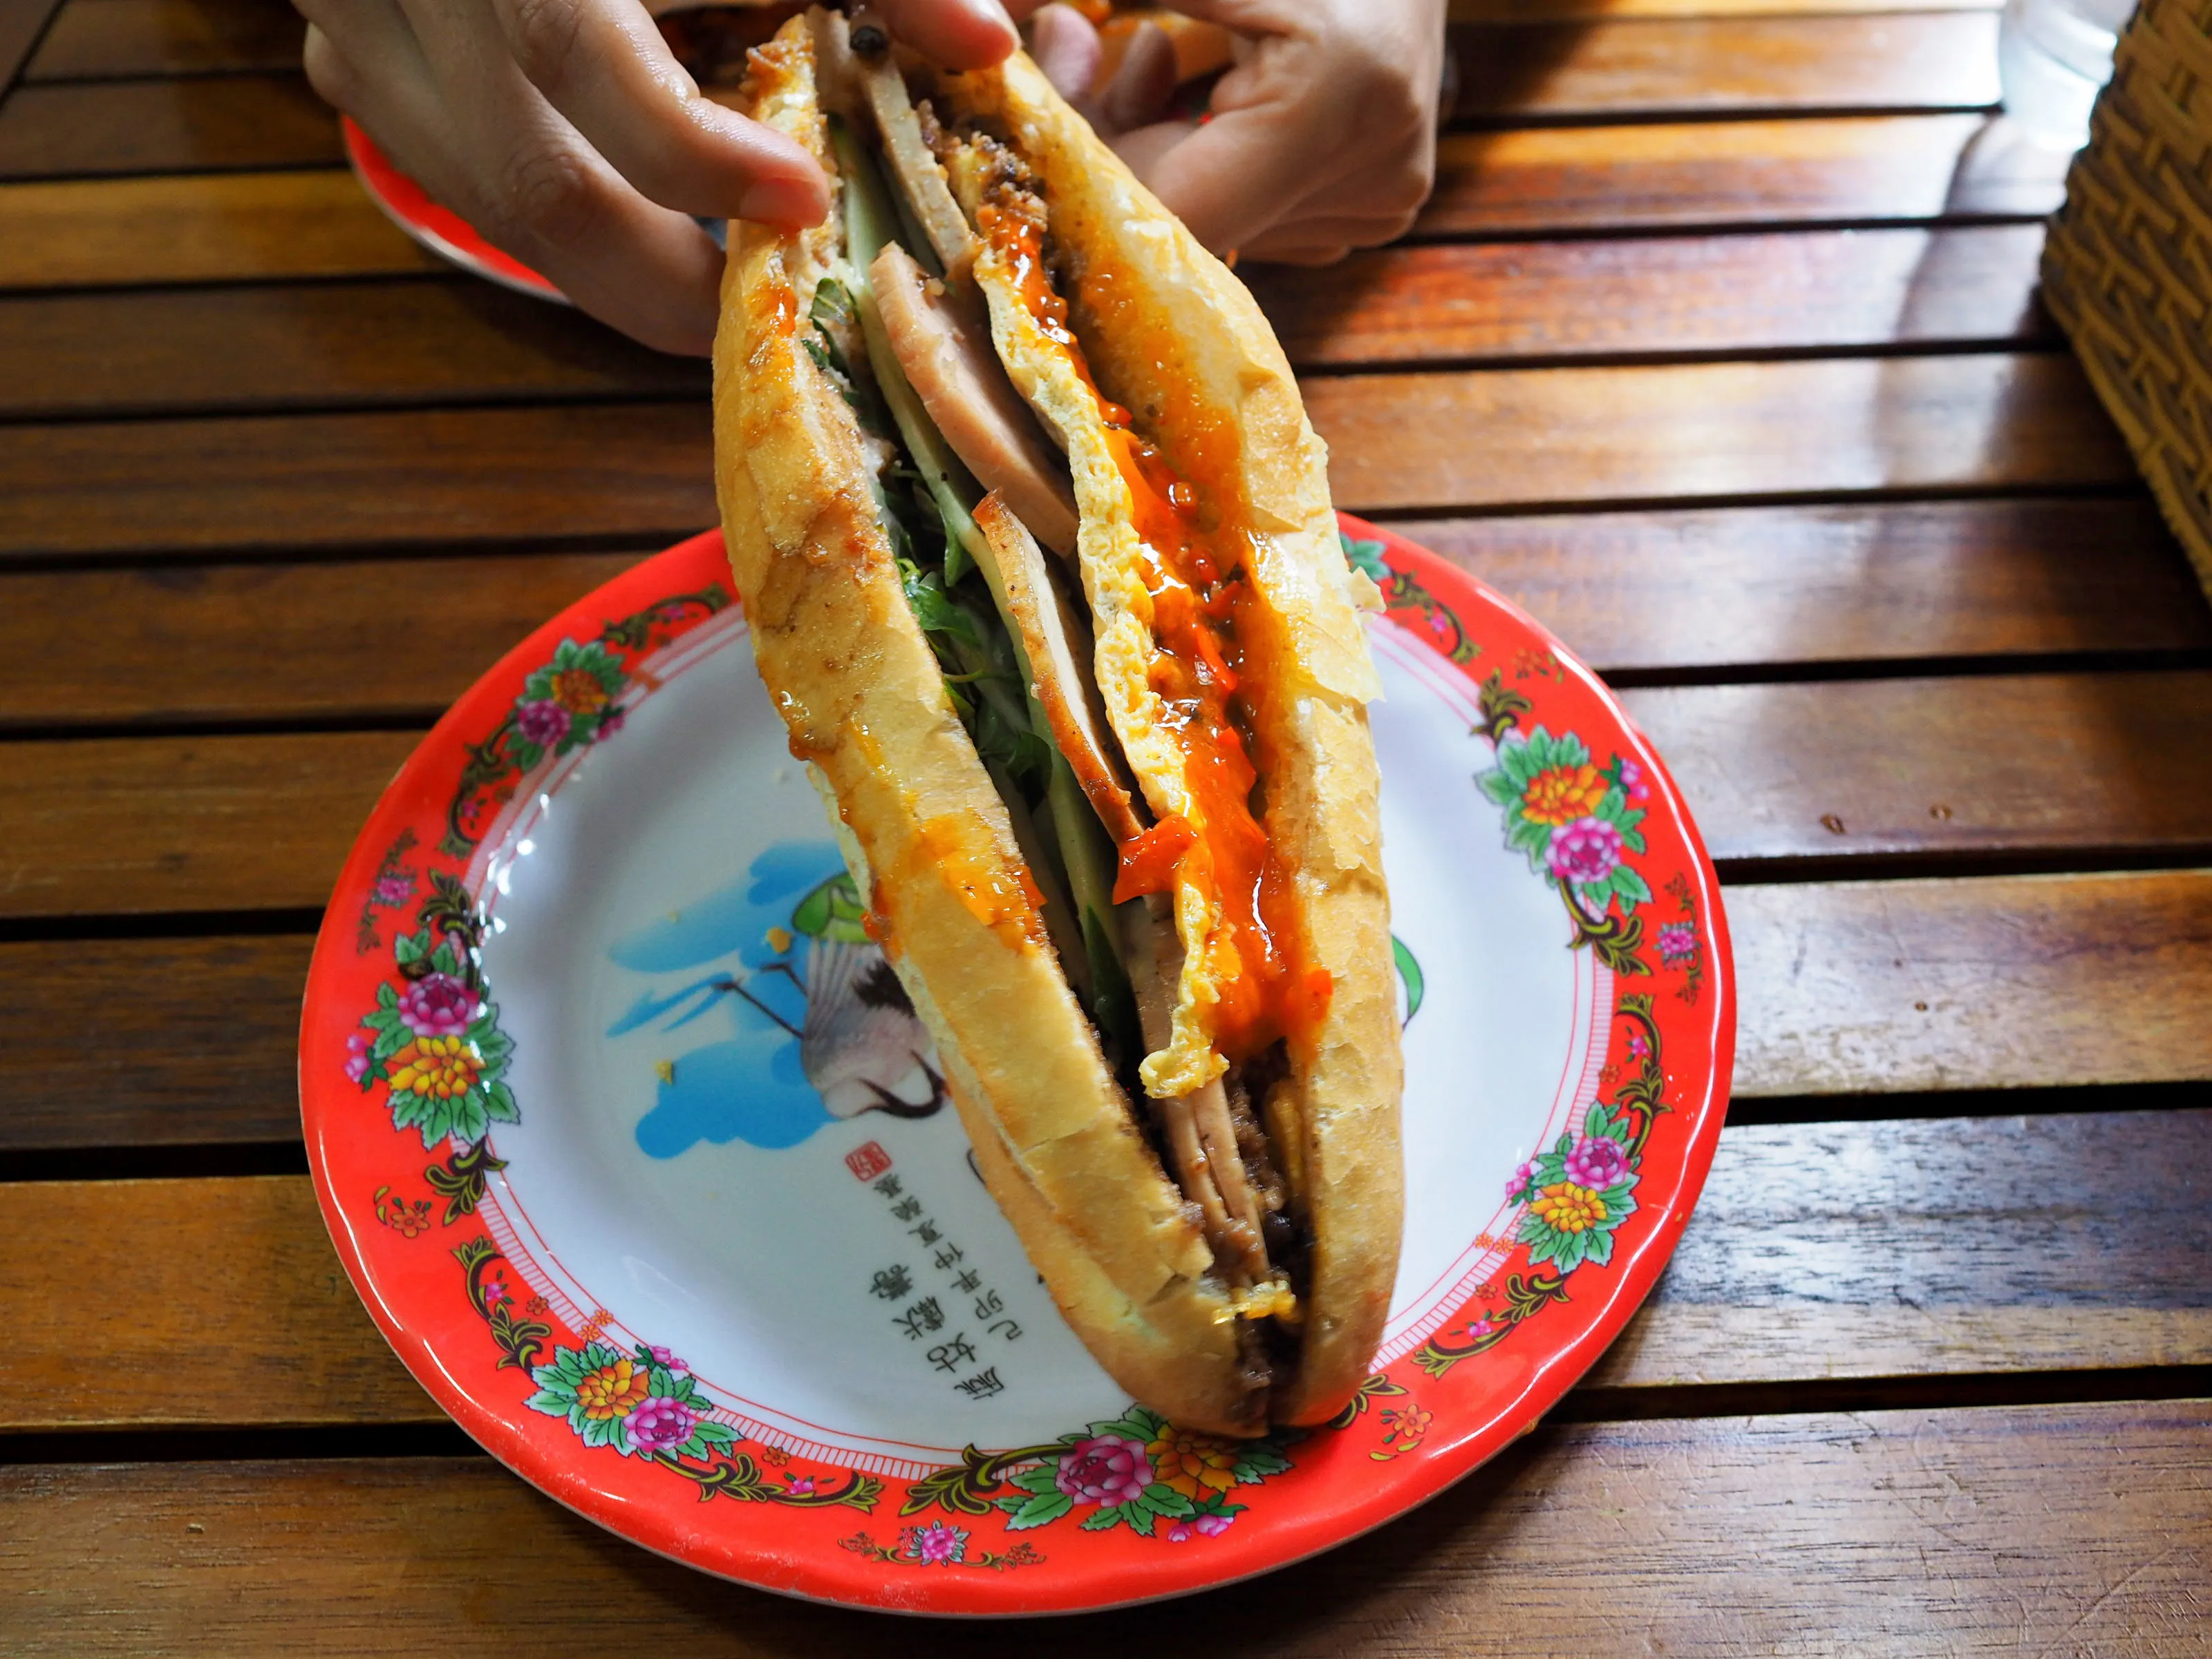 Banh mi is a heavenly combination of crispy, fluffy baguette, egg, a flavourful protein, fresh herbs, cucumbers and radishes, spicy chilli, pork liver pâté and an umami rich sauce.